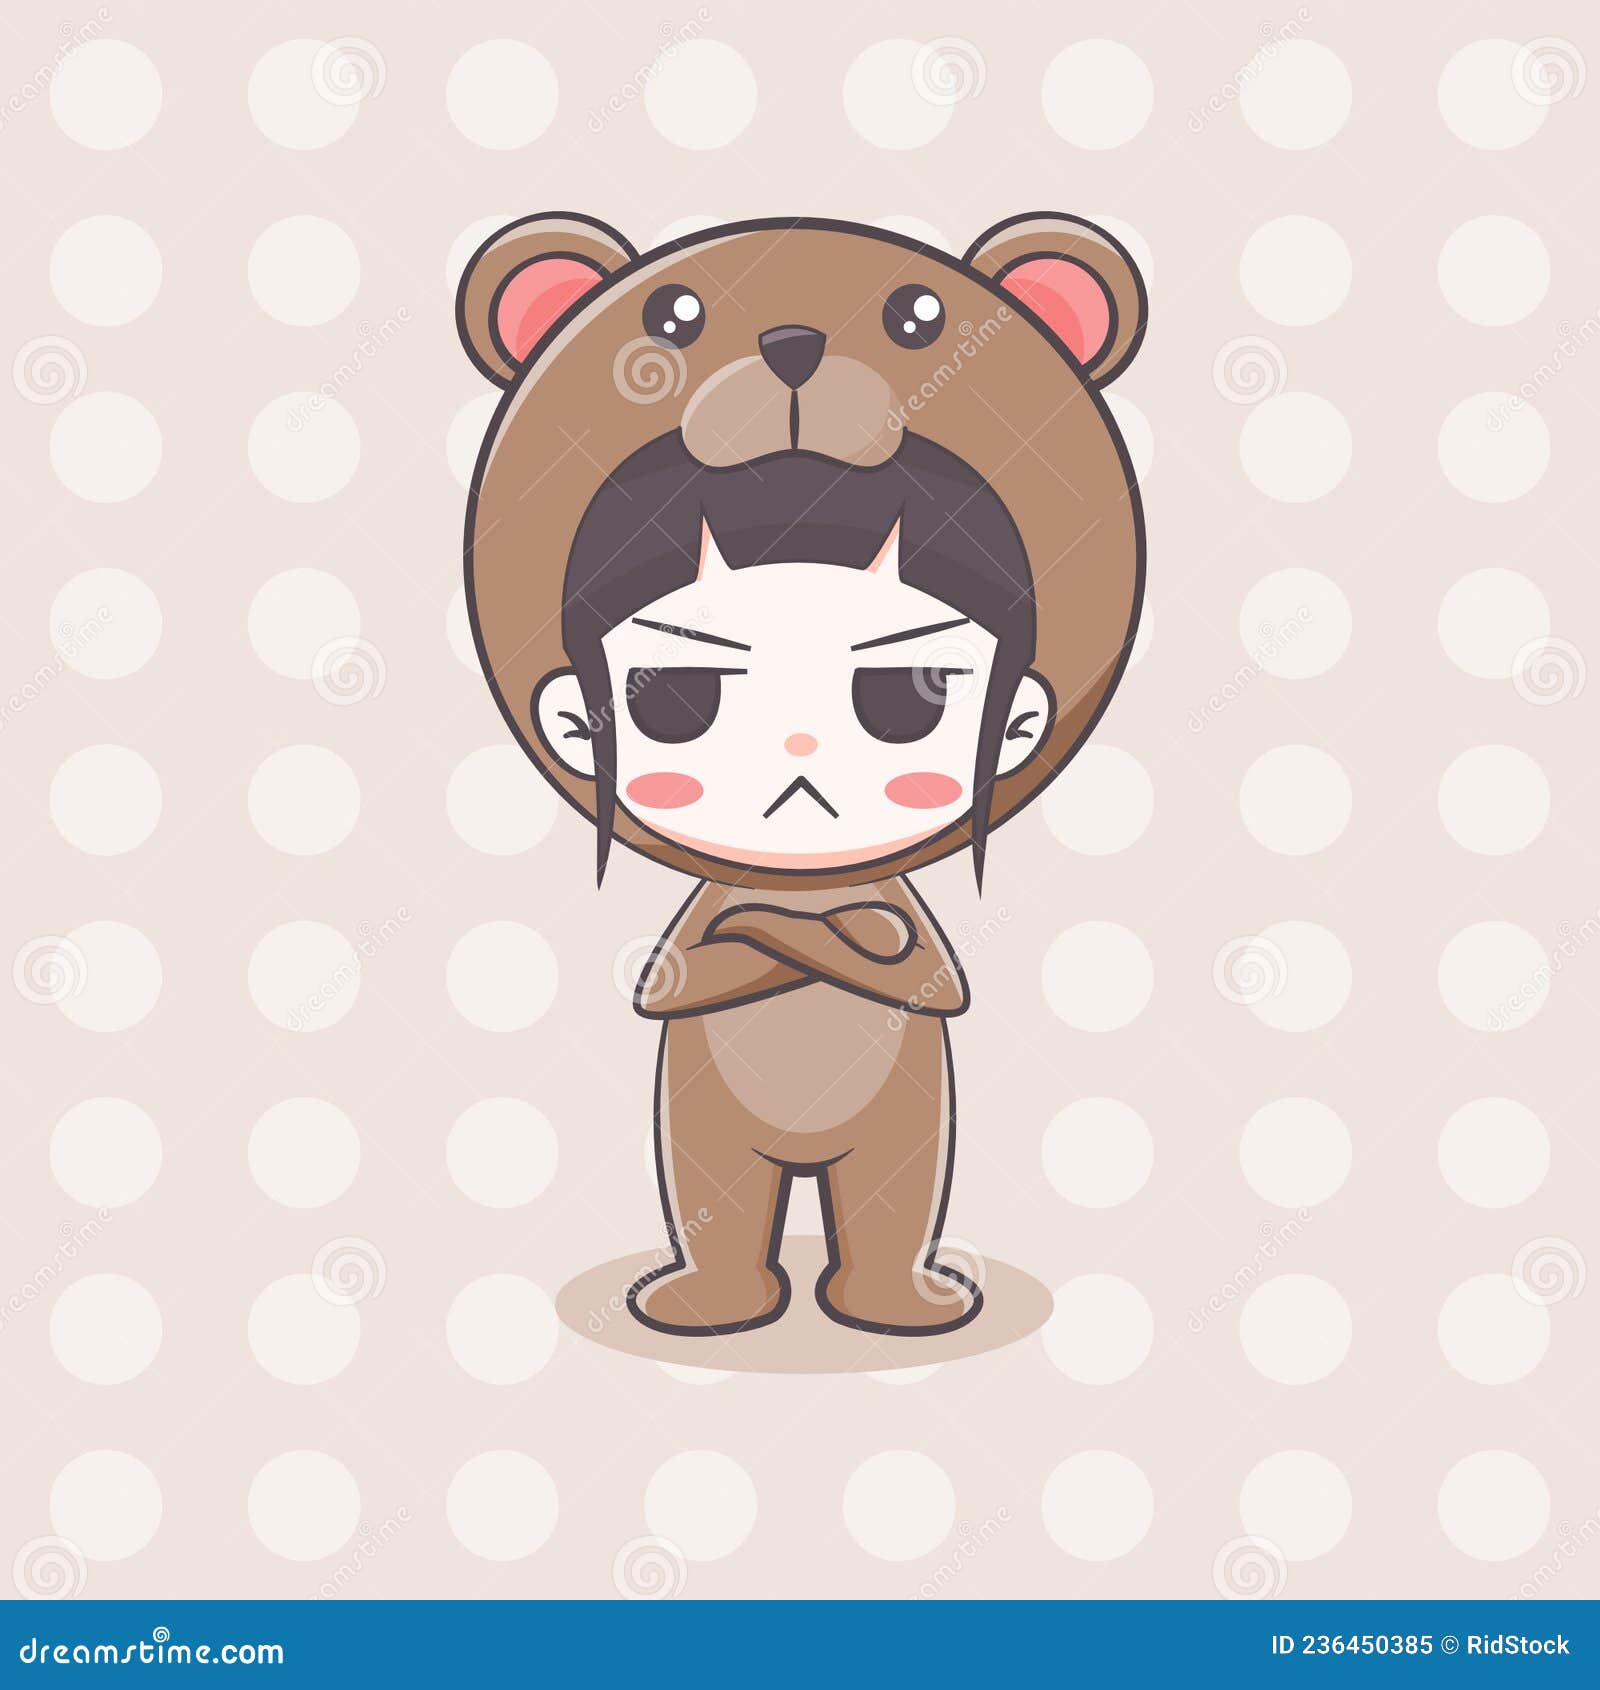 cute bear costume girl with sulk expression cartoon character